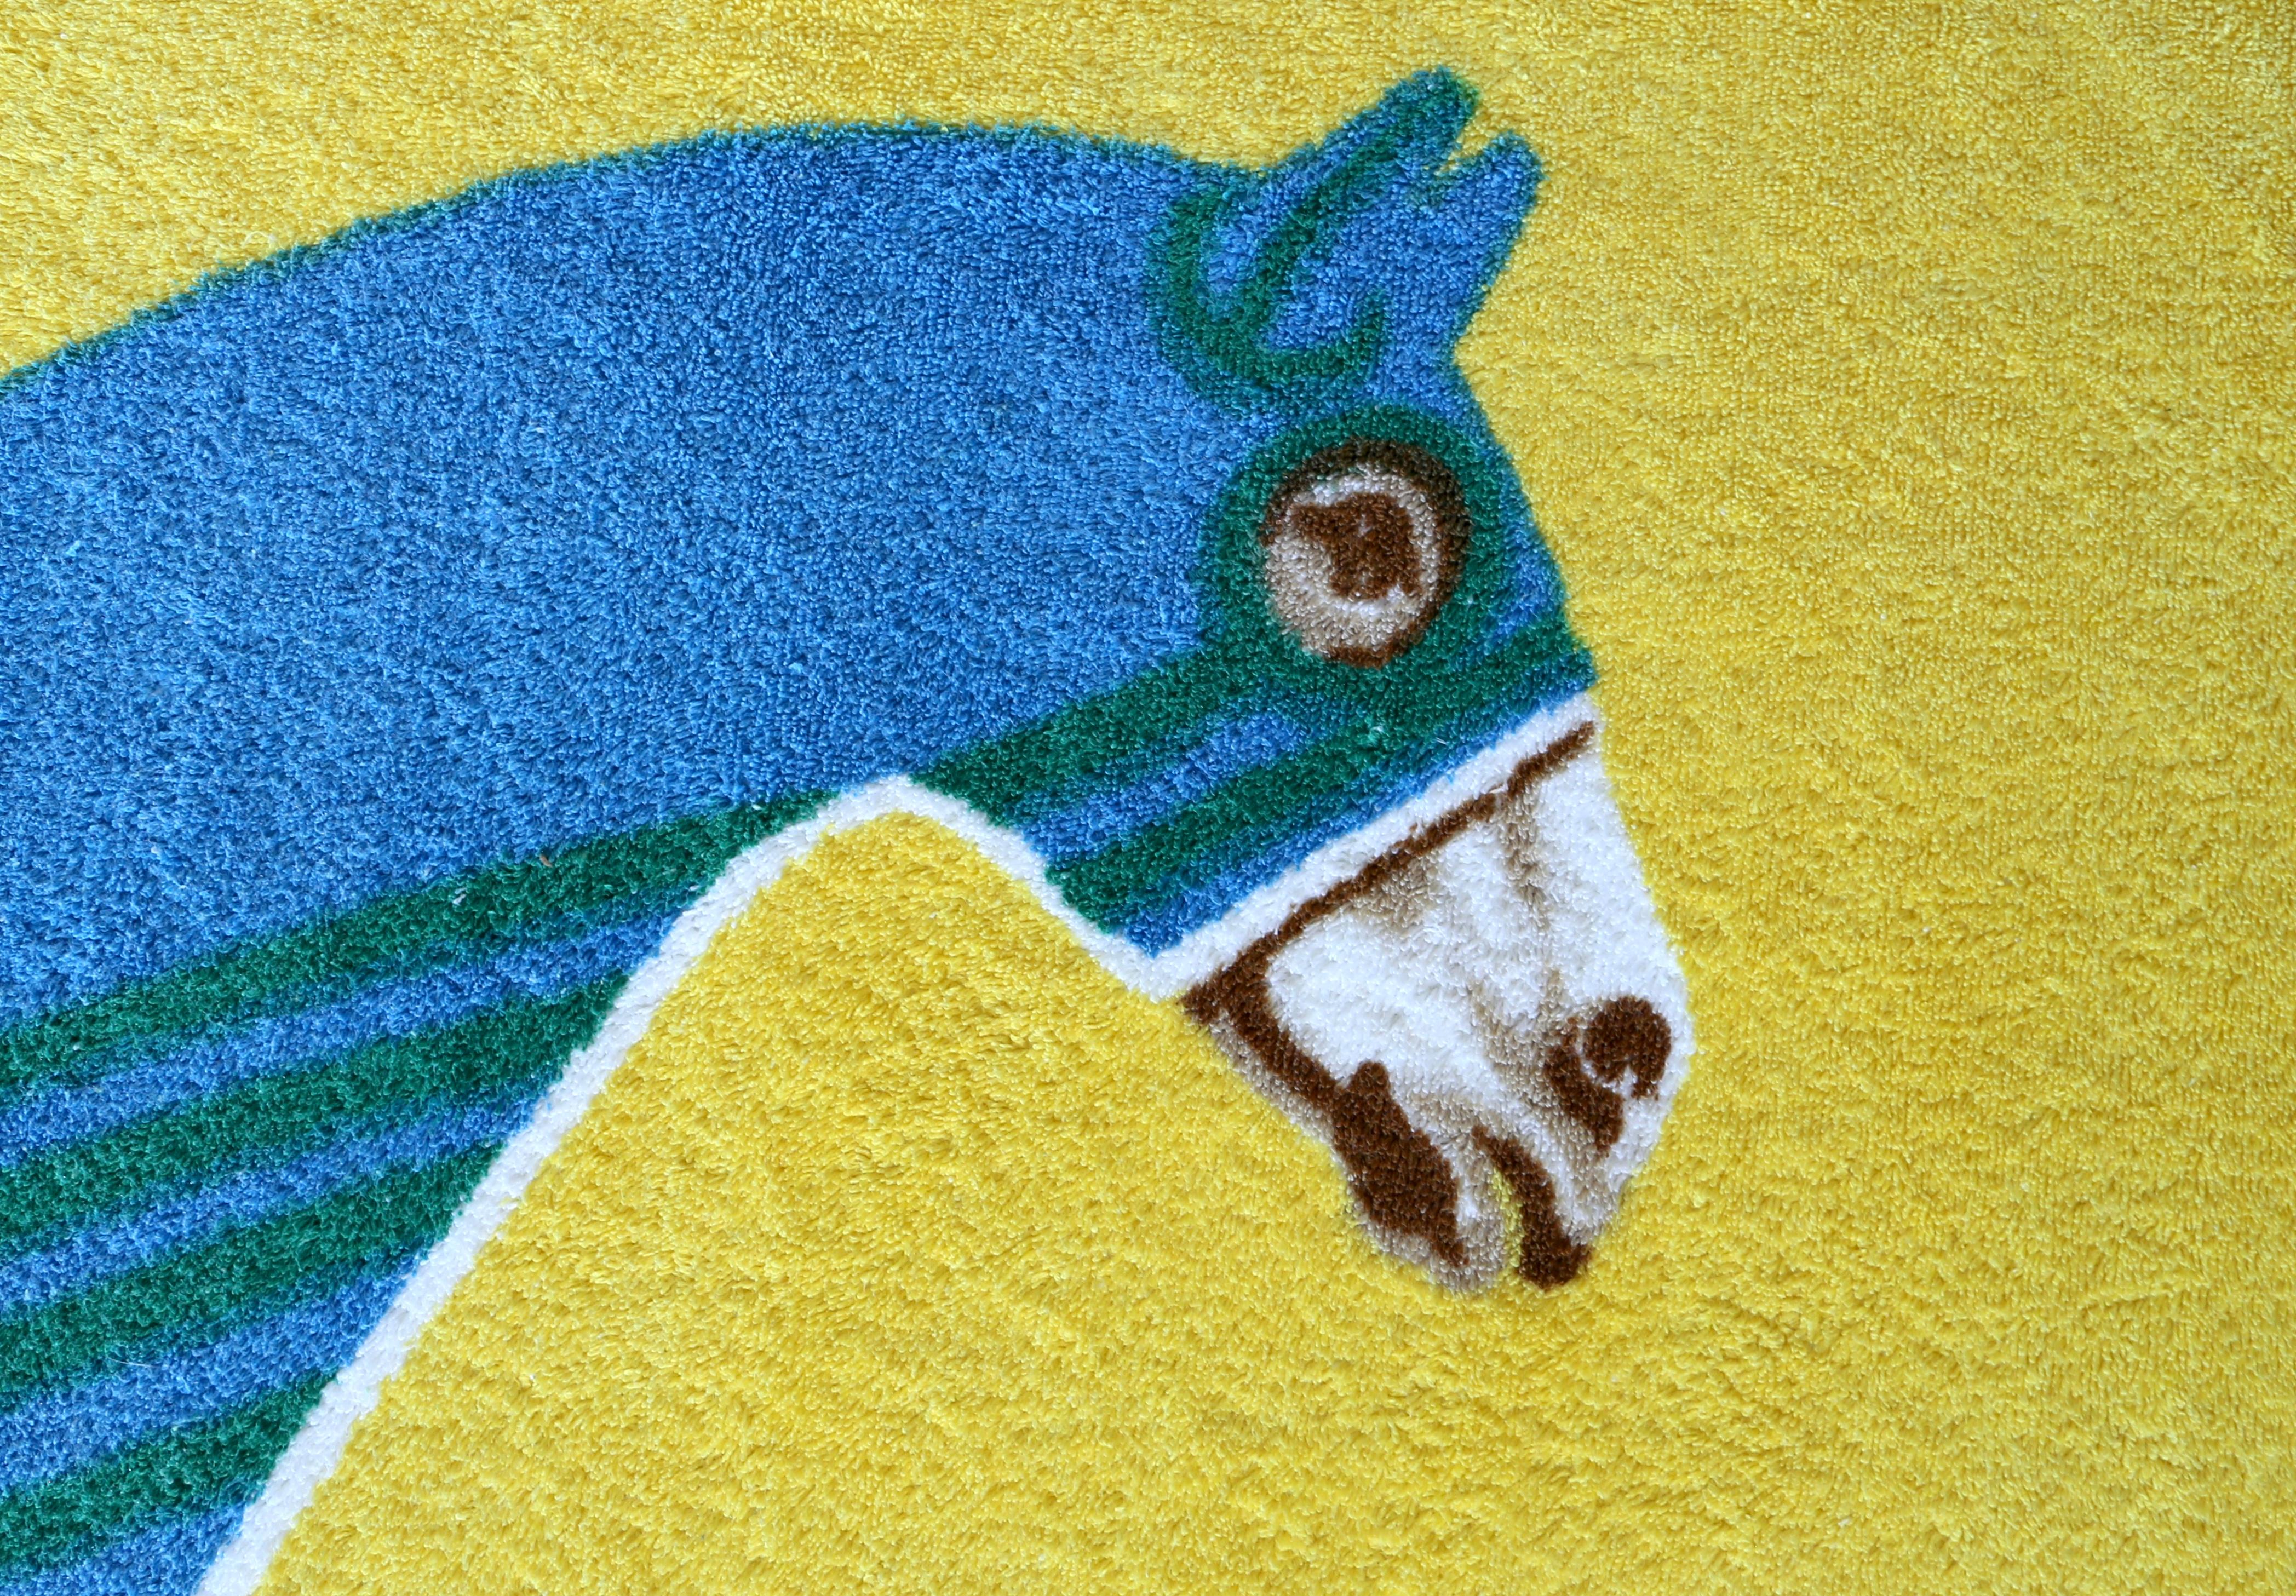 Very rare, yellow and blue equestrian themed beach towel by Hermes dating to 1990's. Towel measures approximately: 56